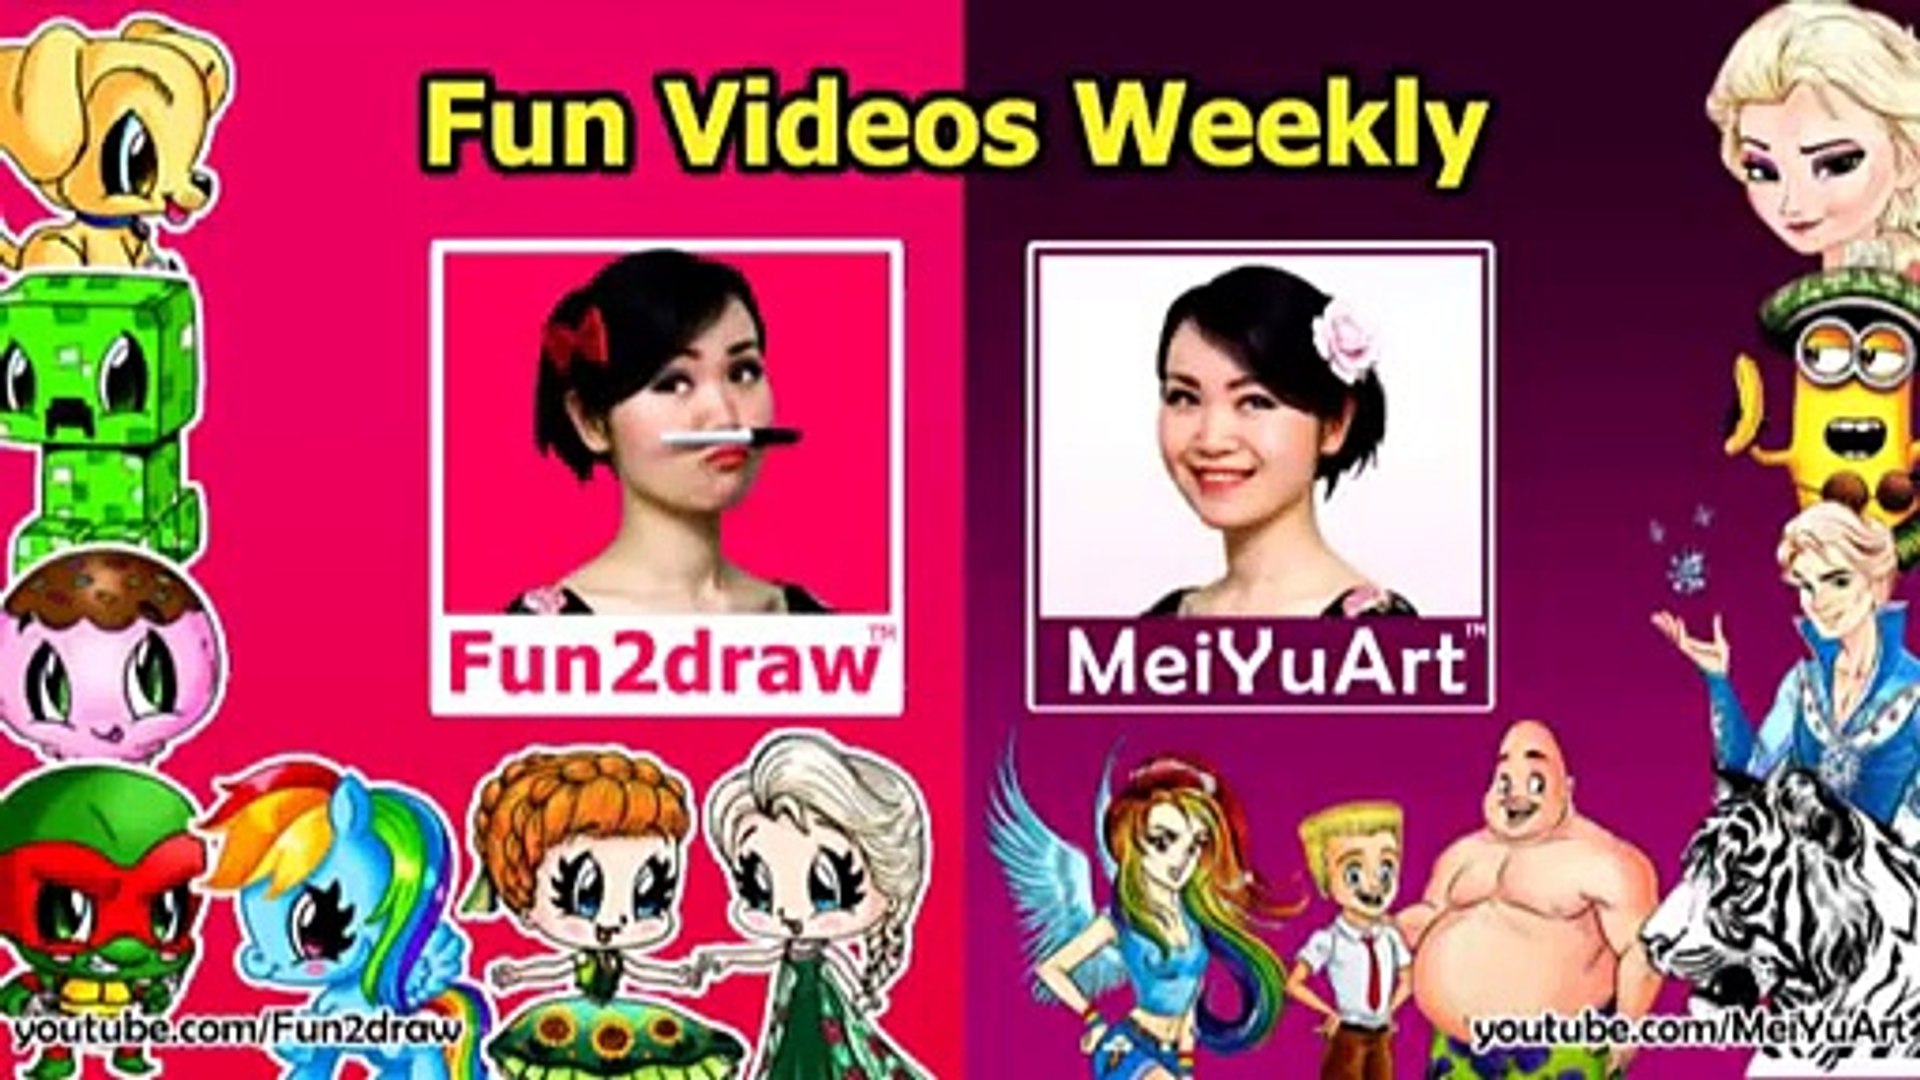 How To Draw Disney Princesses Characters Elsa From Frozen Fun2draw Drawing Channel Dailymotion Video